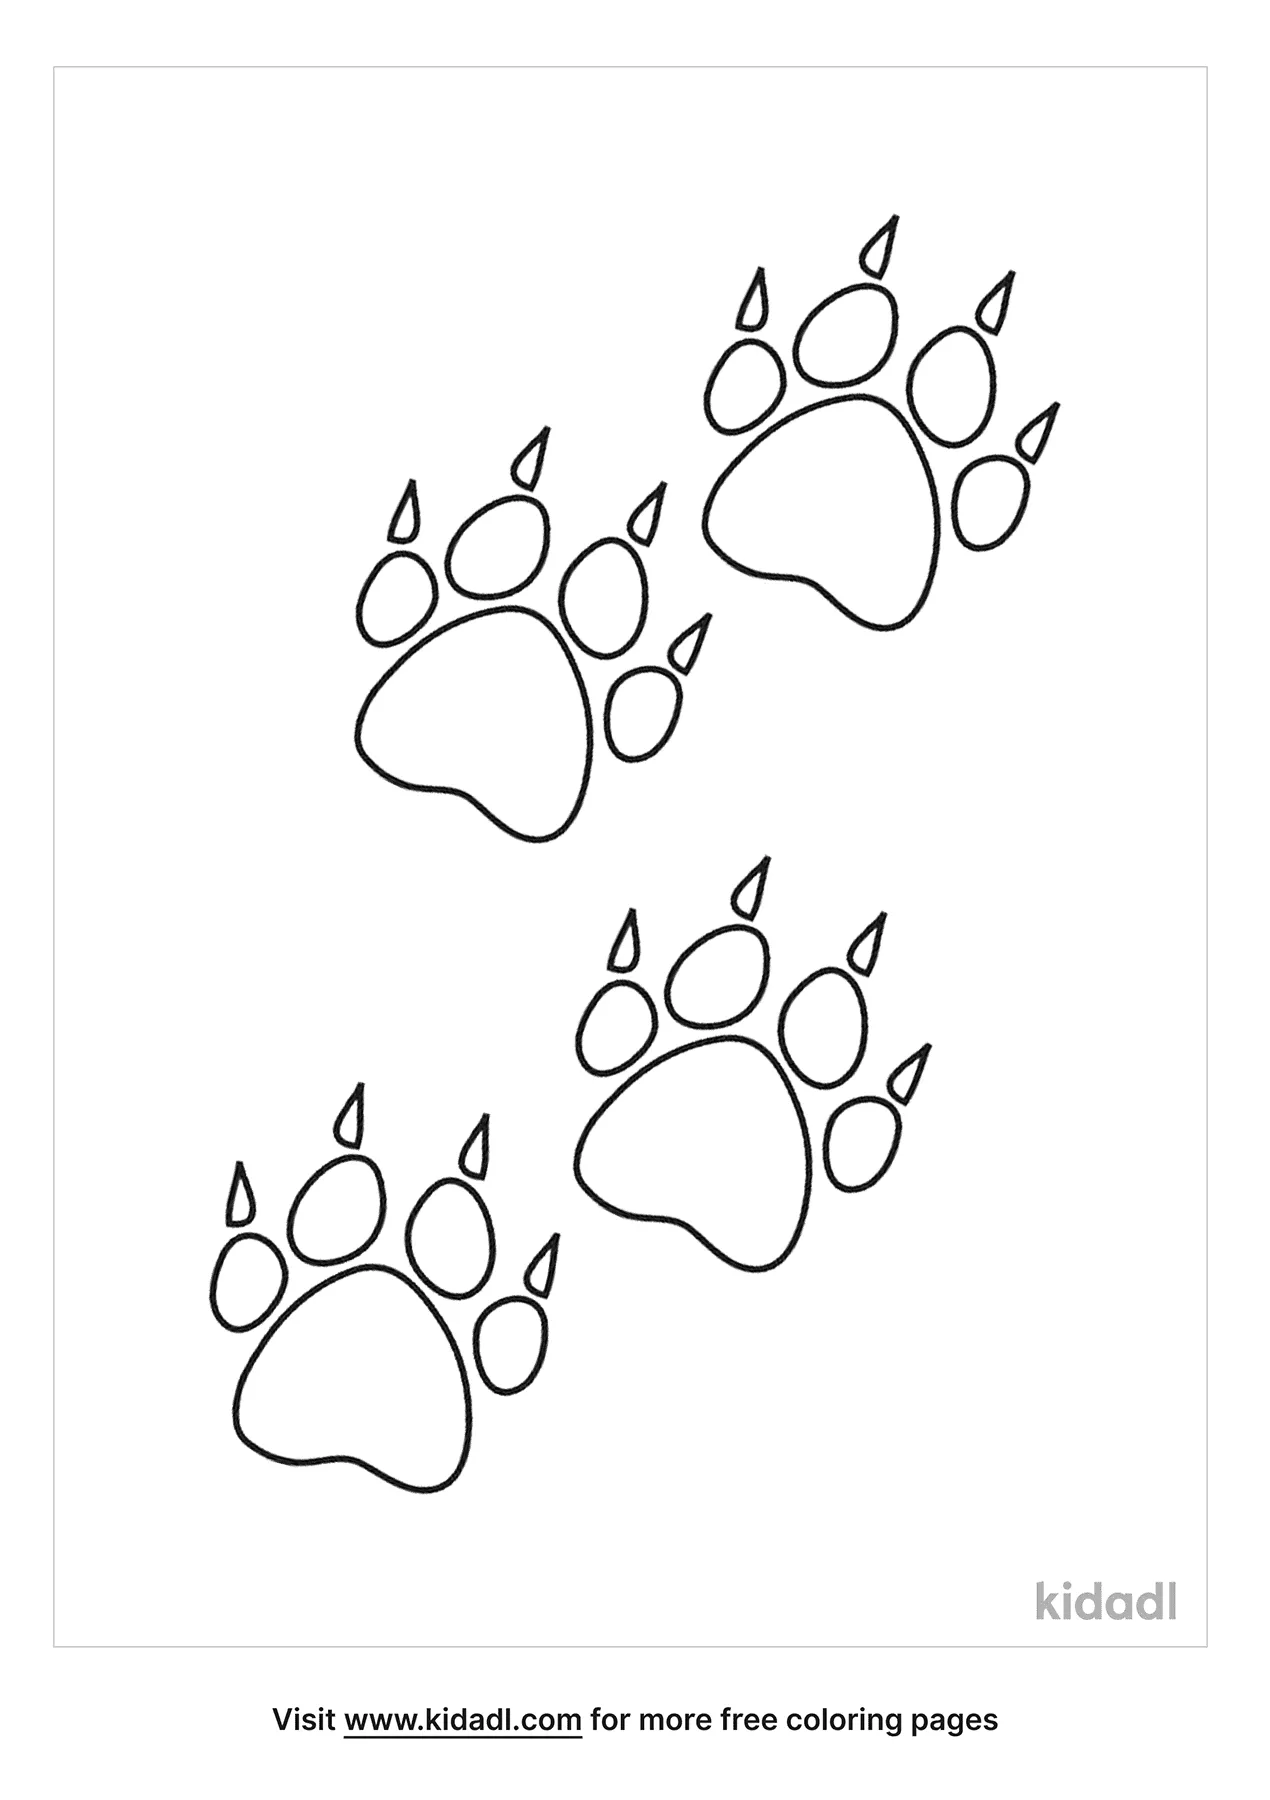 Grizzly Bear Paw Print Coloring Page